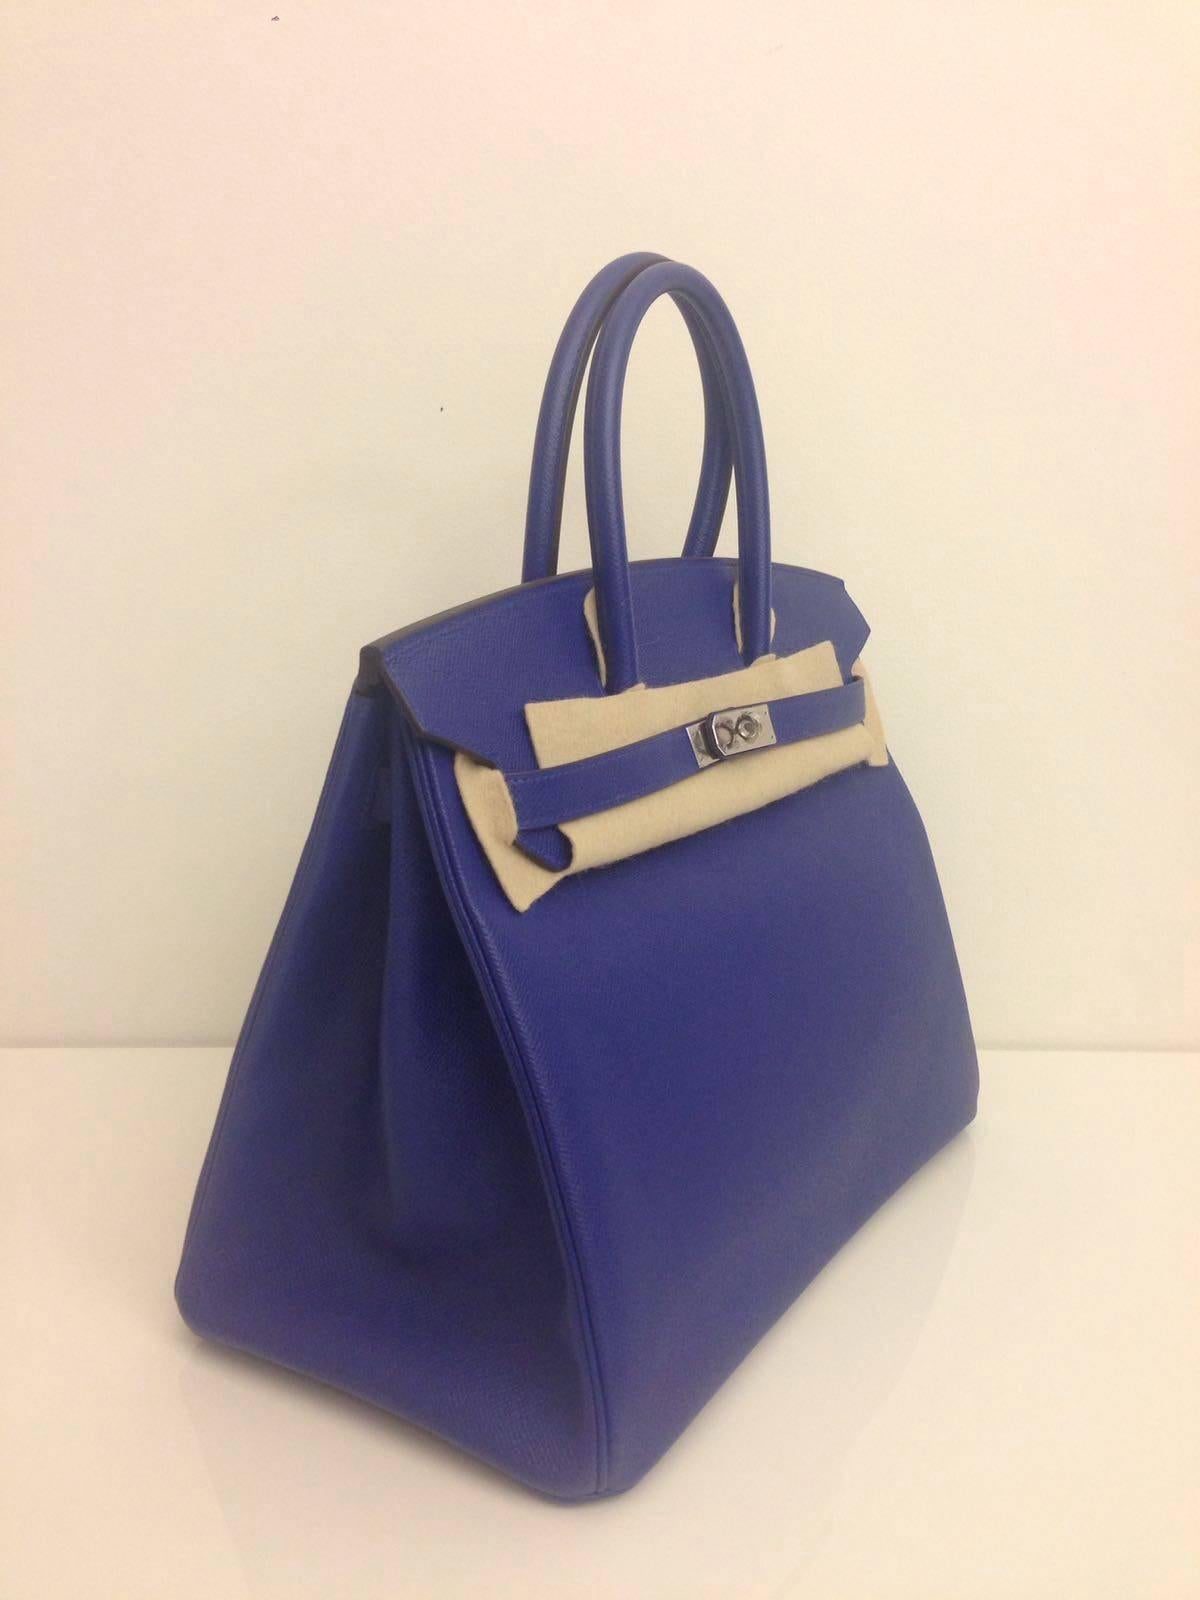 Hermes 
Birkin Size 35
Epsom leather 
Colour Electric Blue
Palladium (silver) hardware 
store fresh, comes with receipt and full set (dust bag, box...) 
Hydeparkfashion specializes in sourcing and delivering authentic luxury handbags, mainly